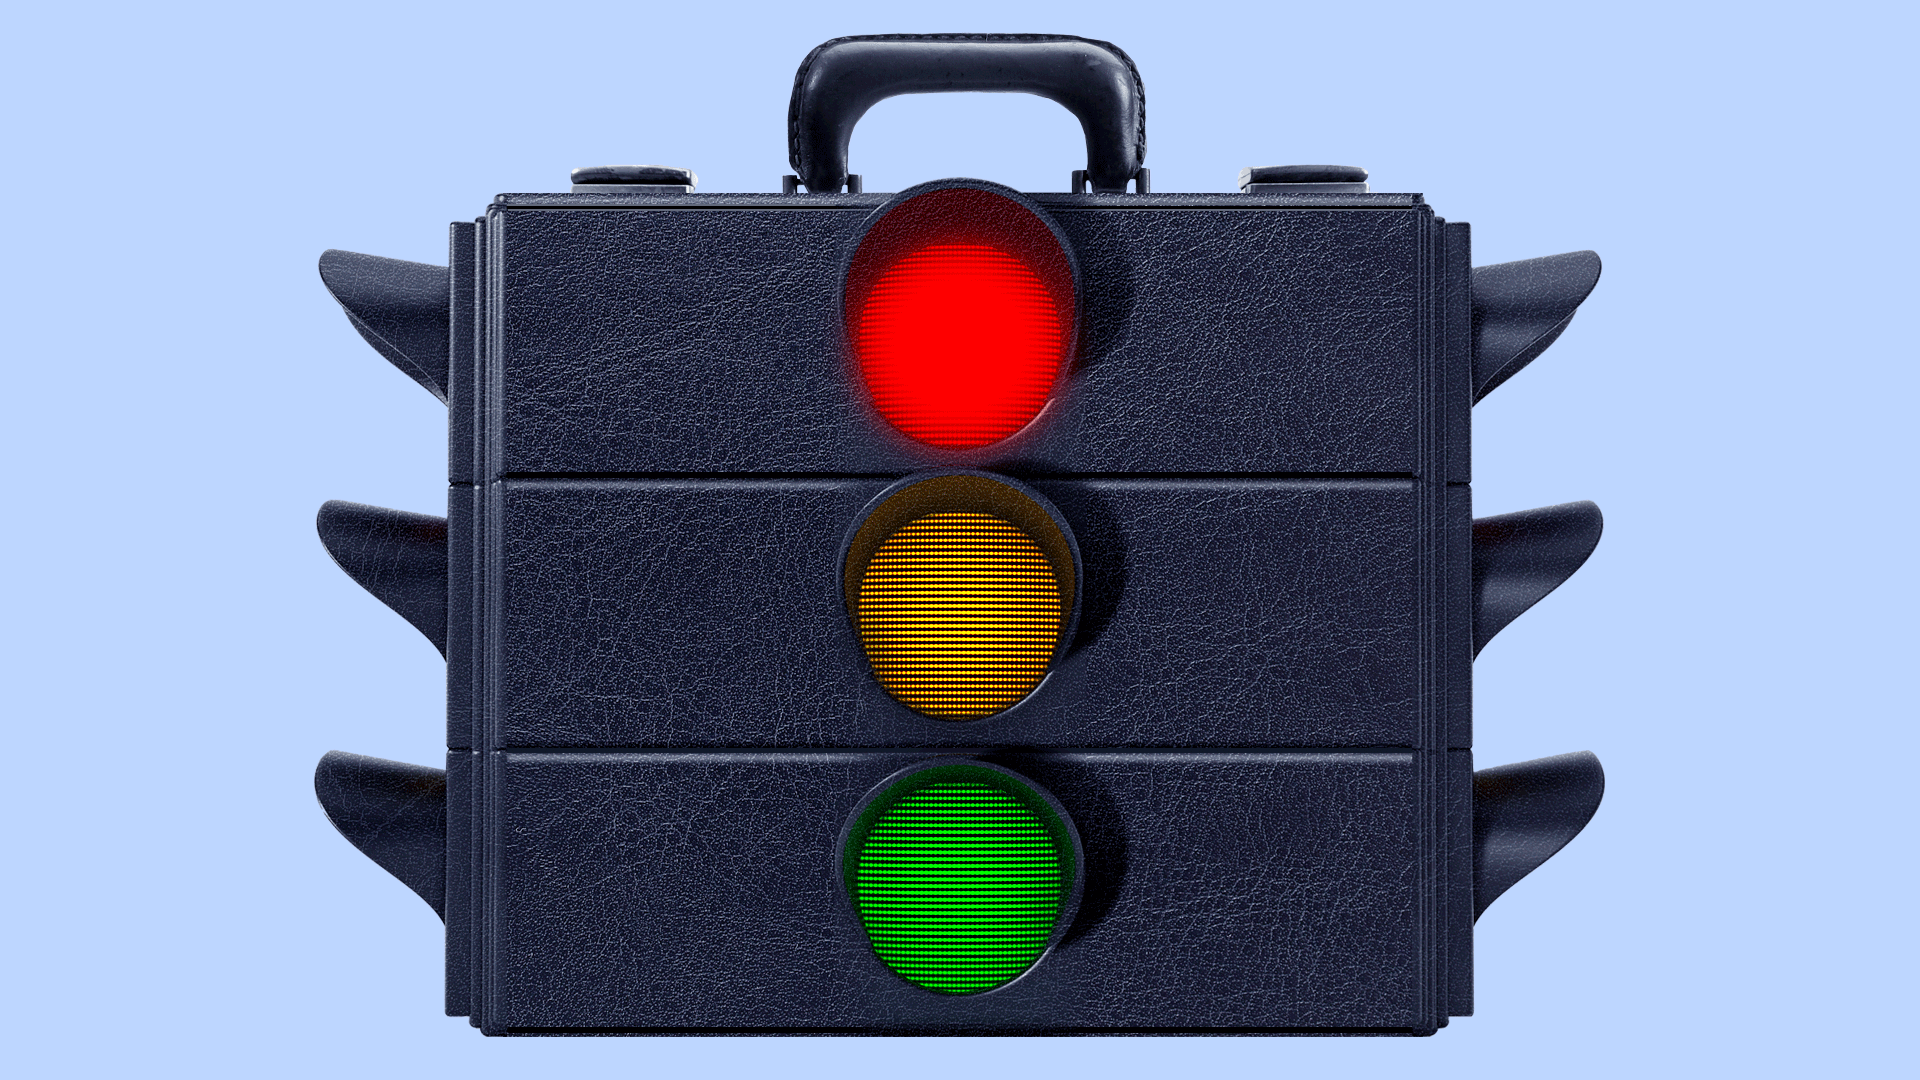 Animation of a briefcase-shaped traffic light cycling through red to green